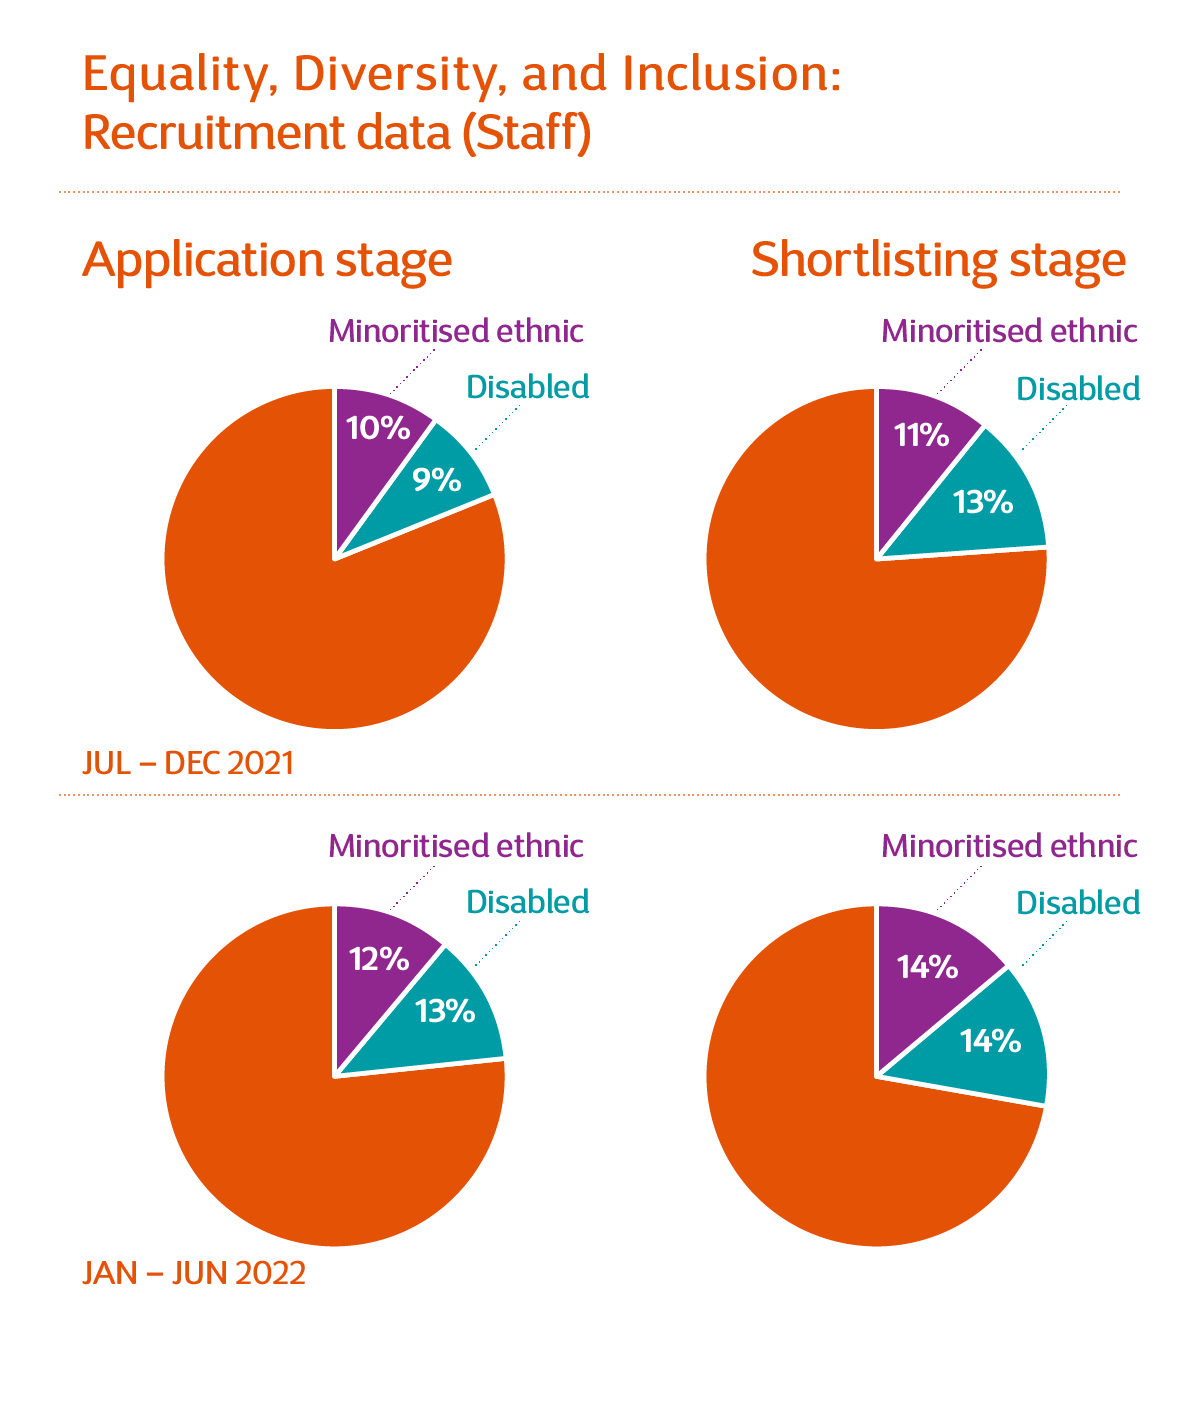 Staff recruitment data expanded in copy